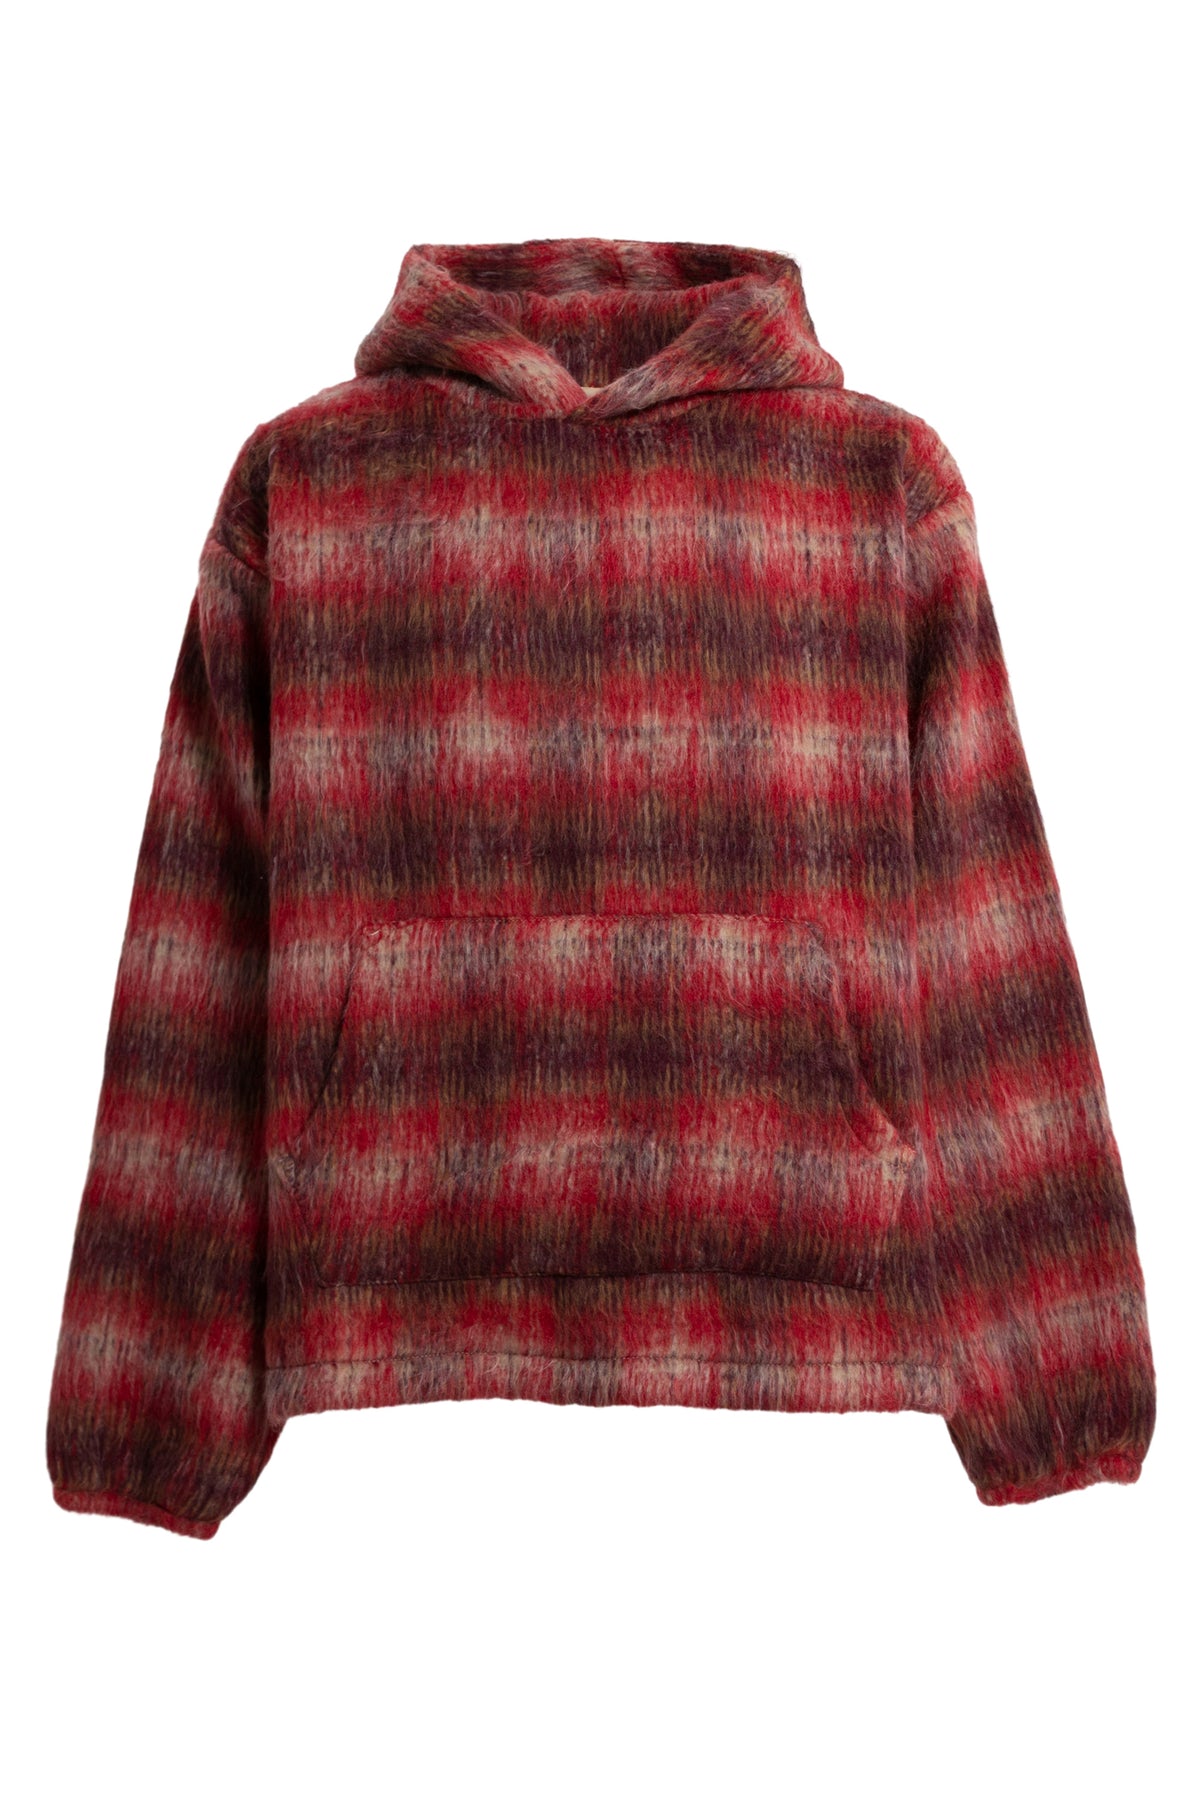 NAMELESS PONCHO HOODIE / RED